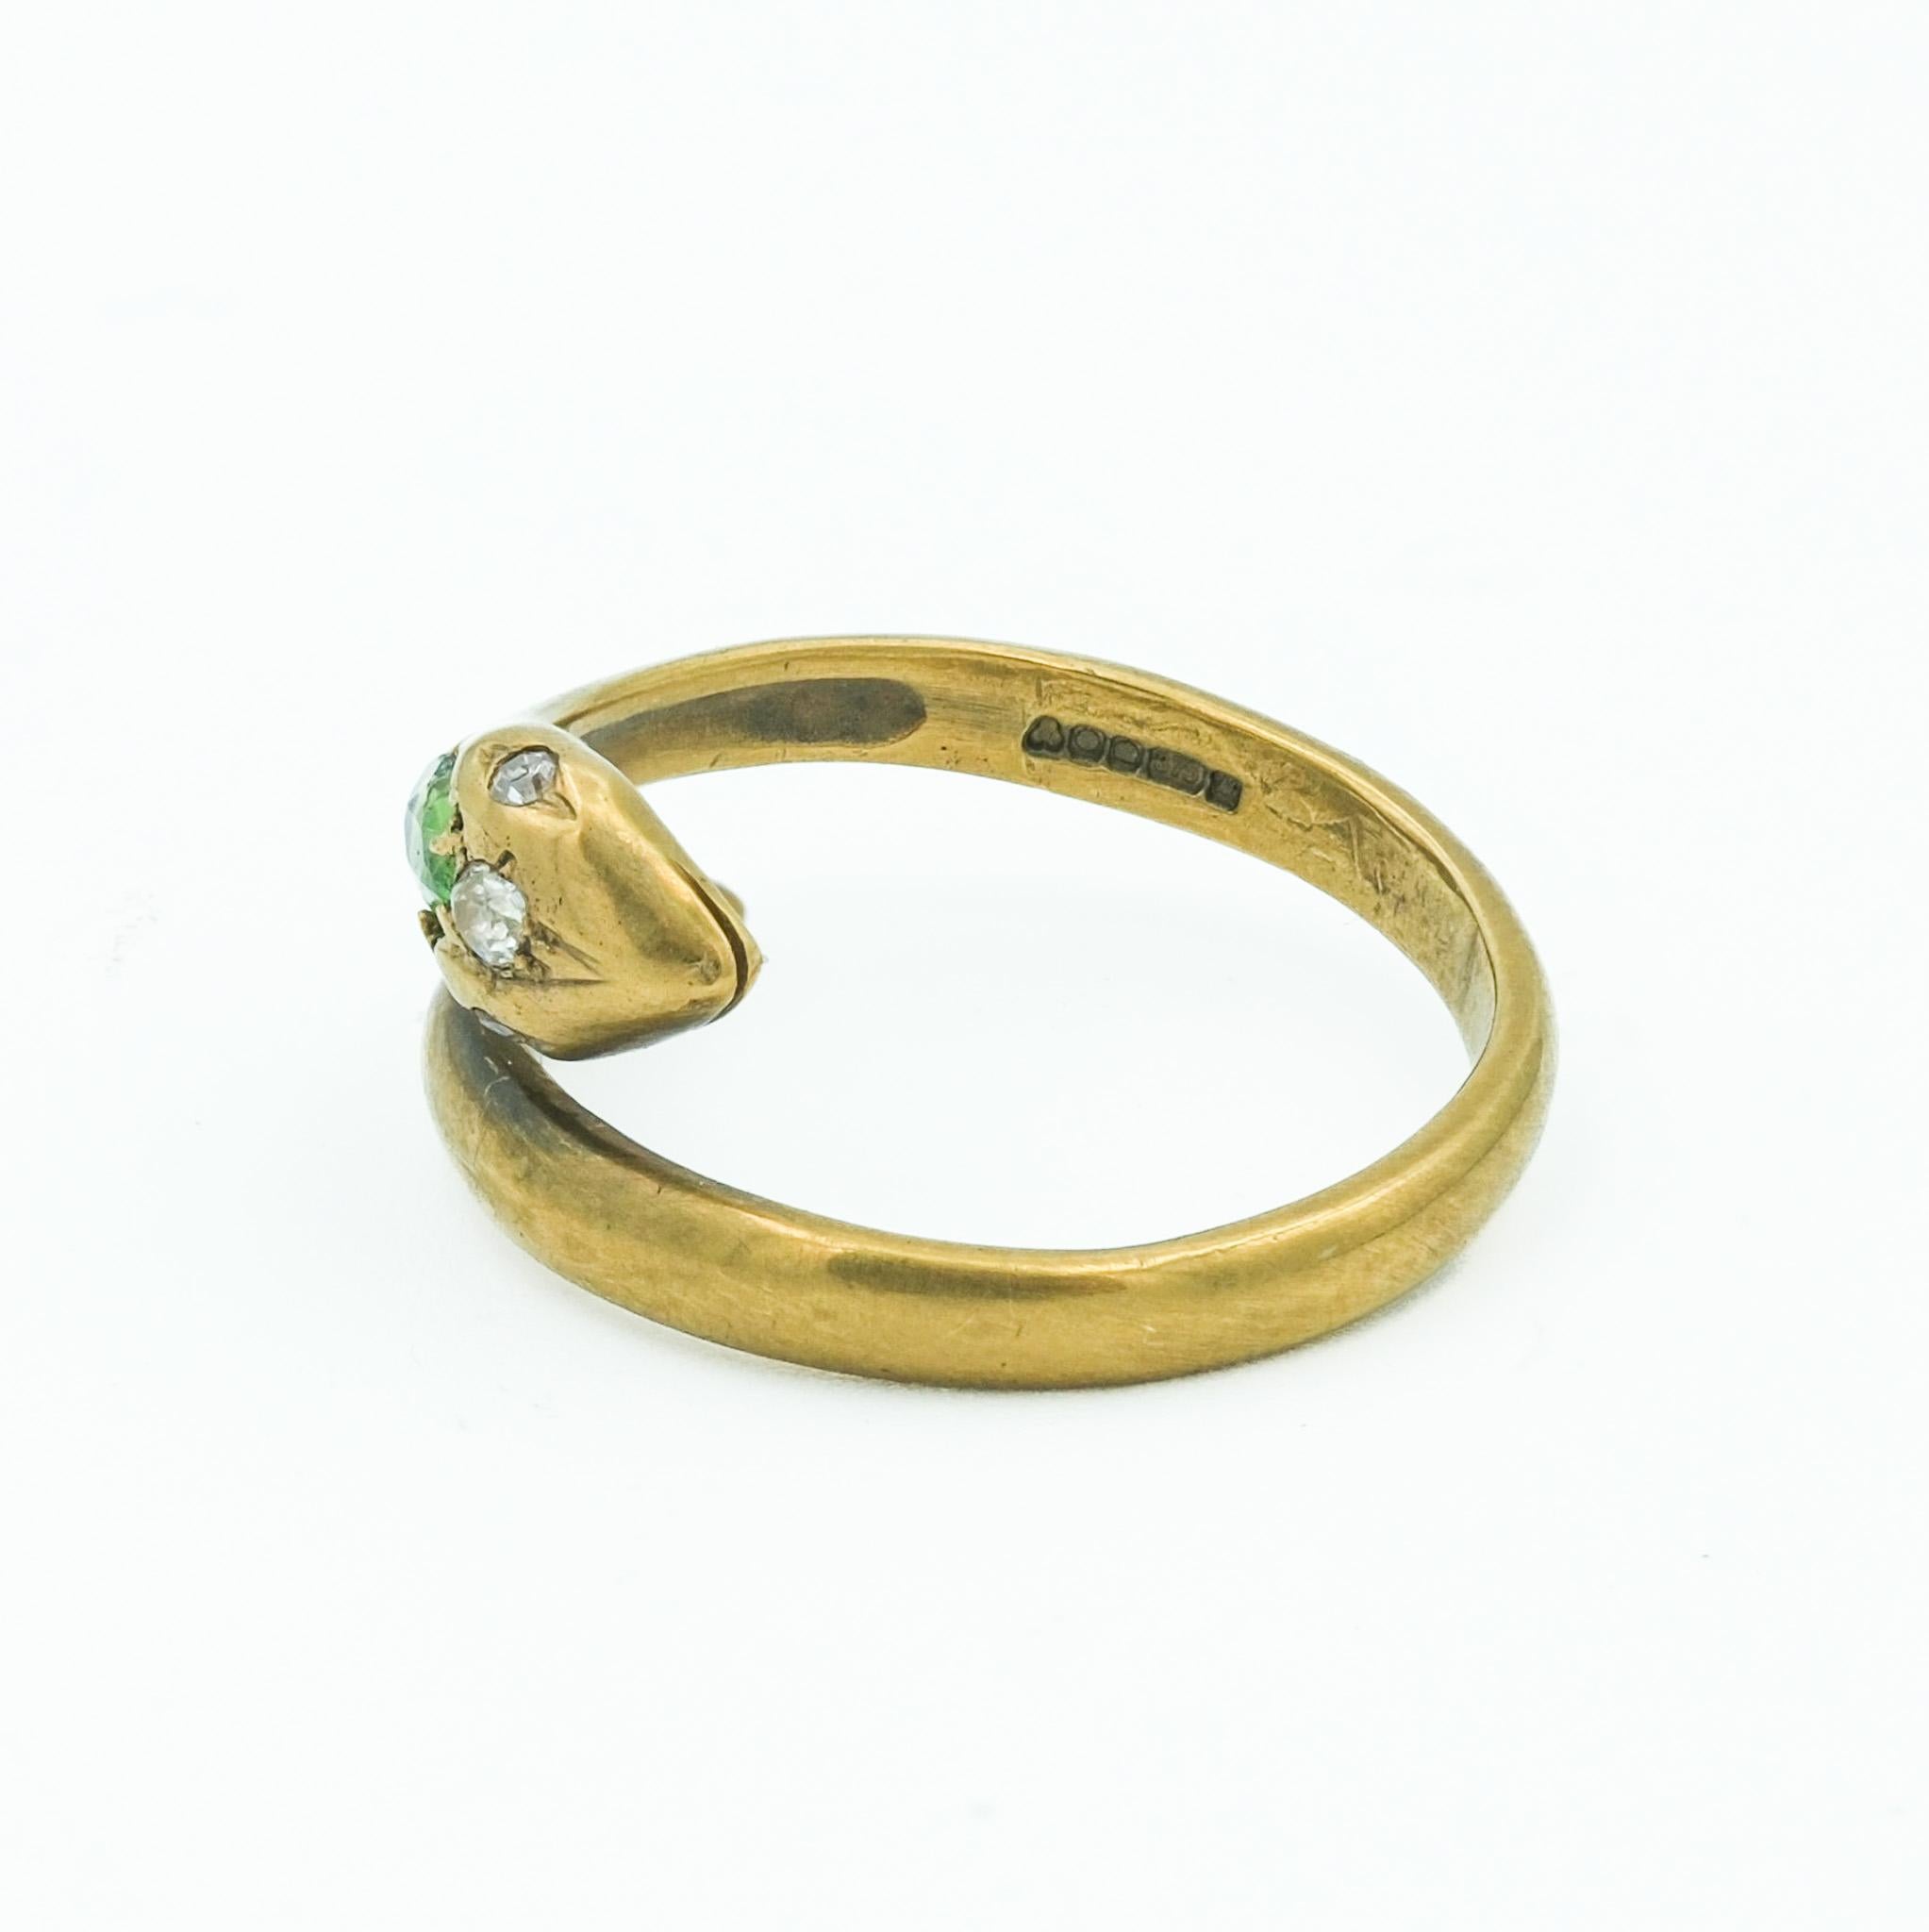 9 Karat Yellow Gold Snake Ring with Demantoid Garnet and Diamonds In Good Condition For Sale In Fairfield, CT